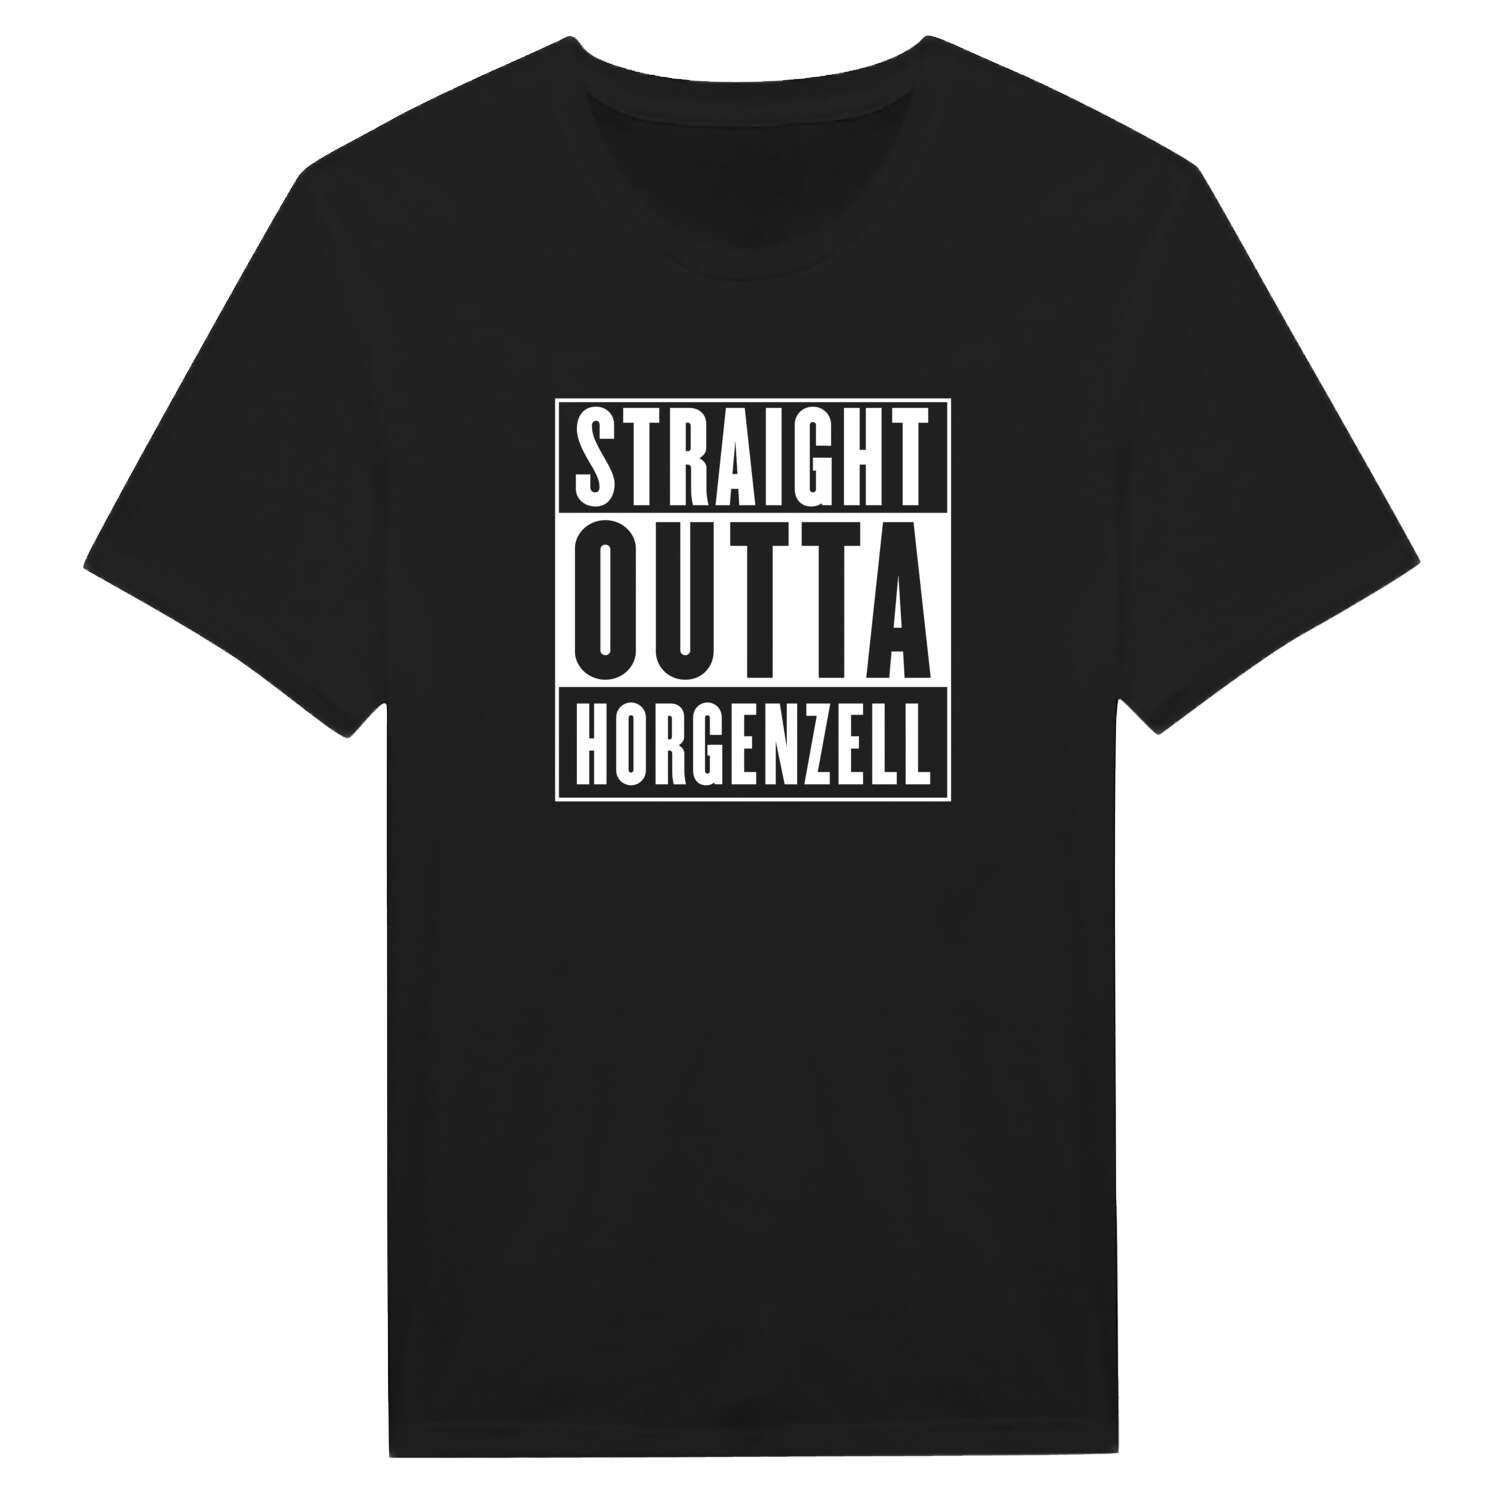 Horgenzell T-Shirt »Straight Outta«